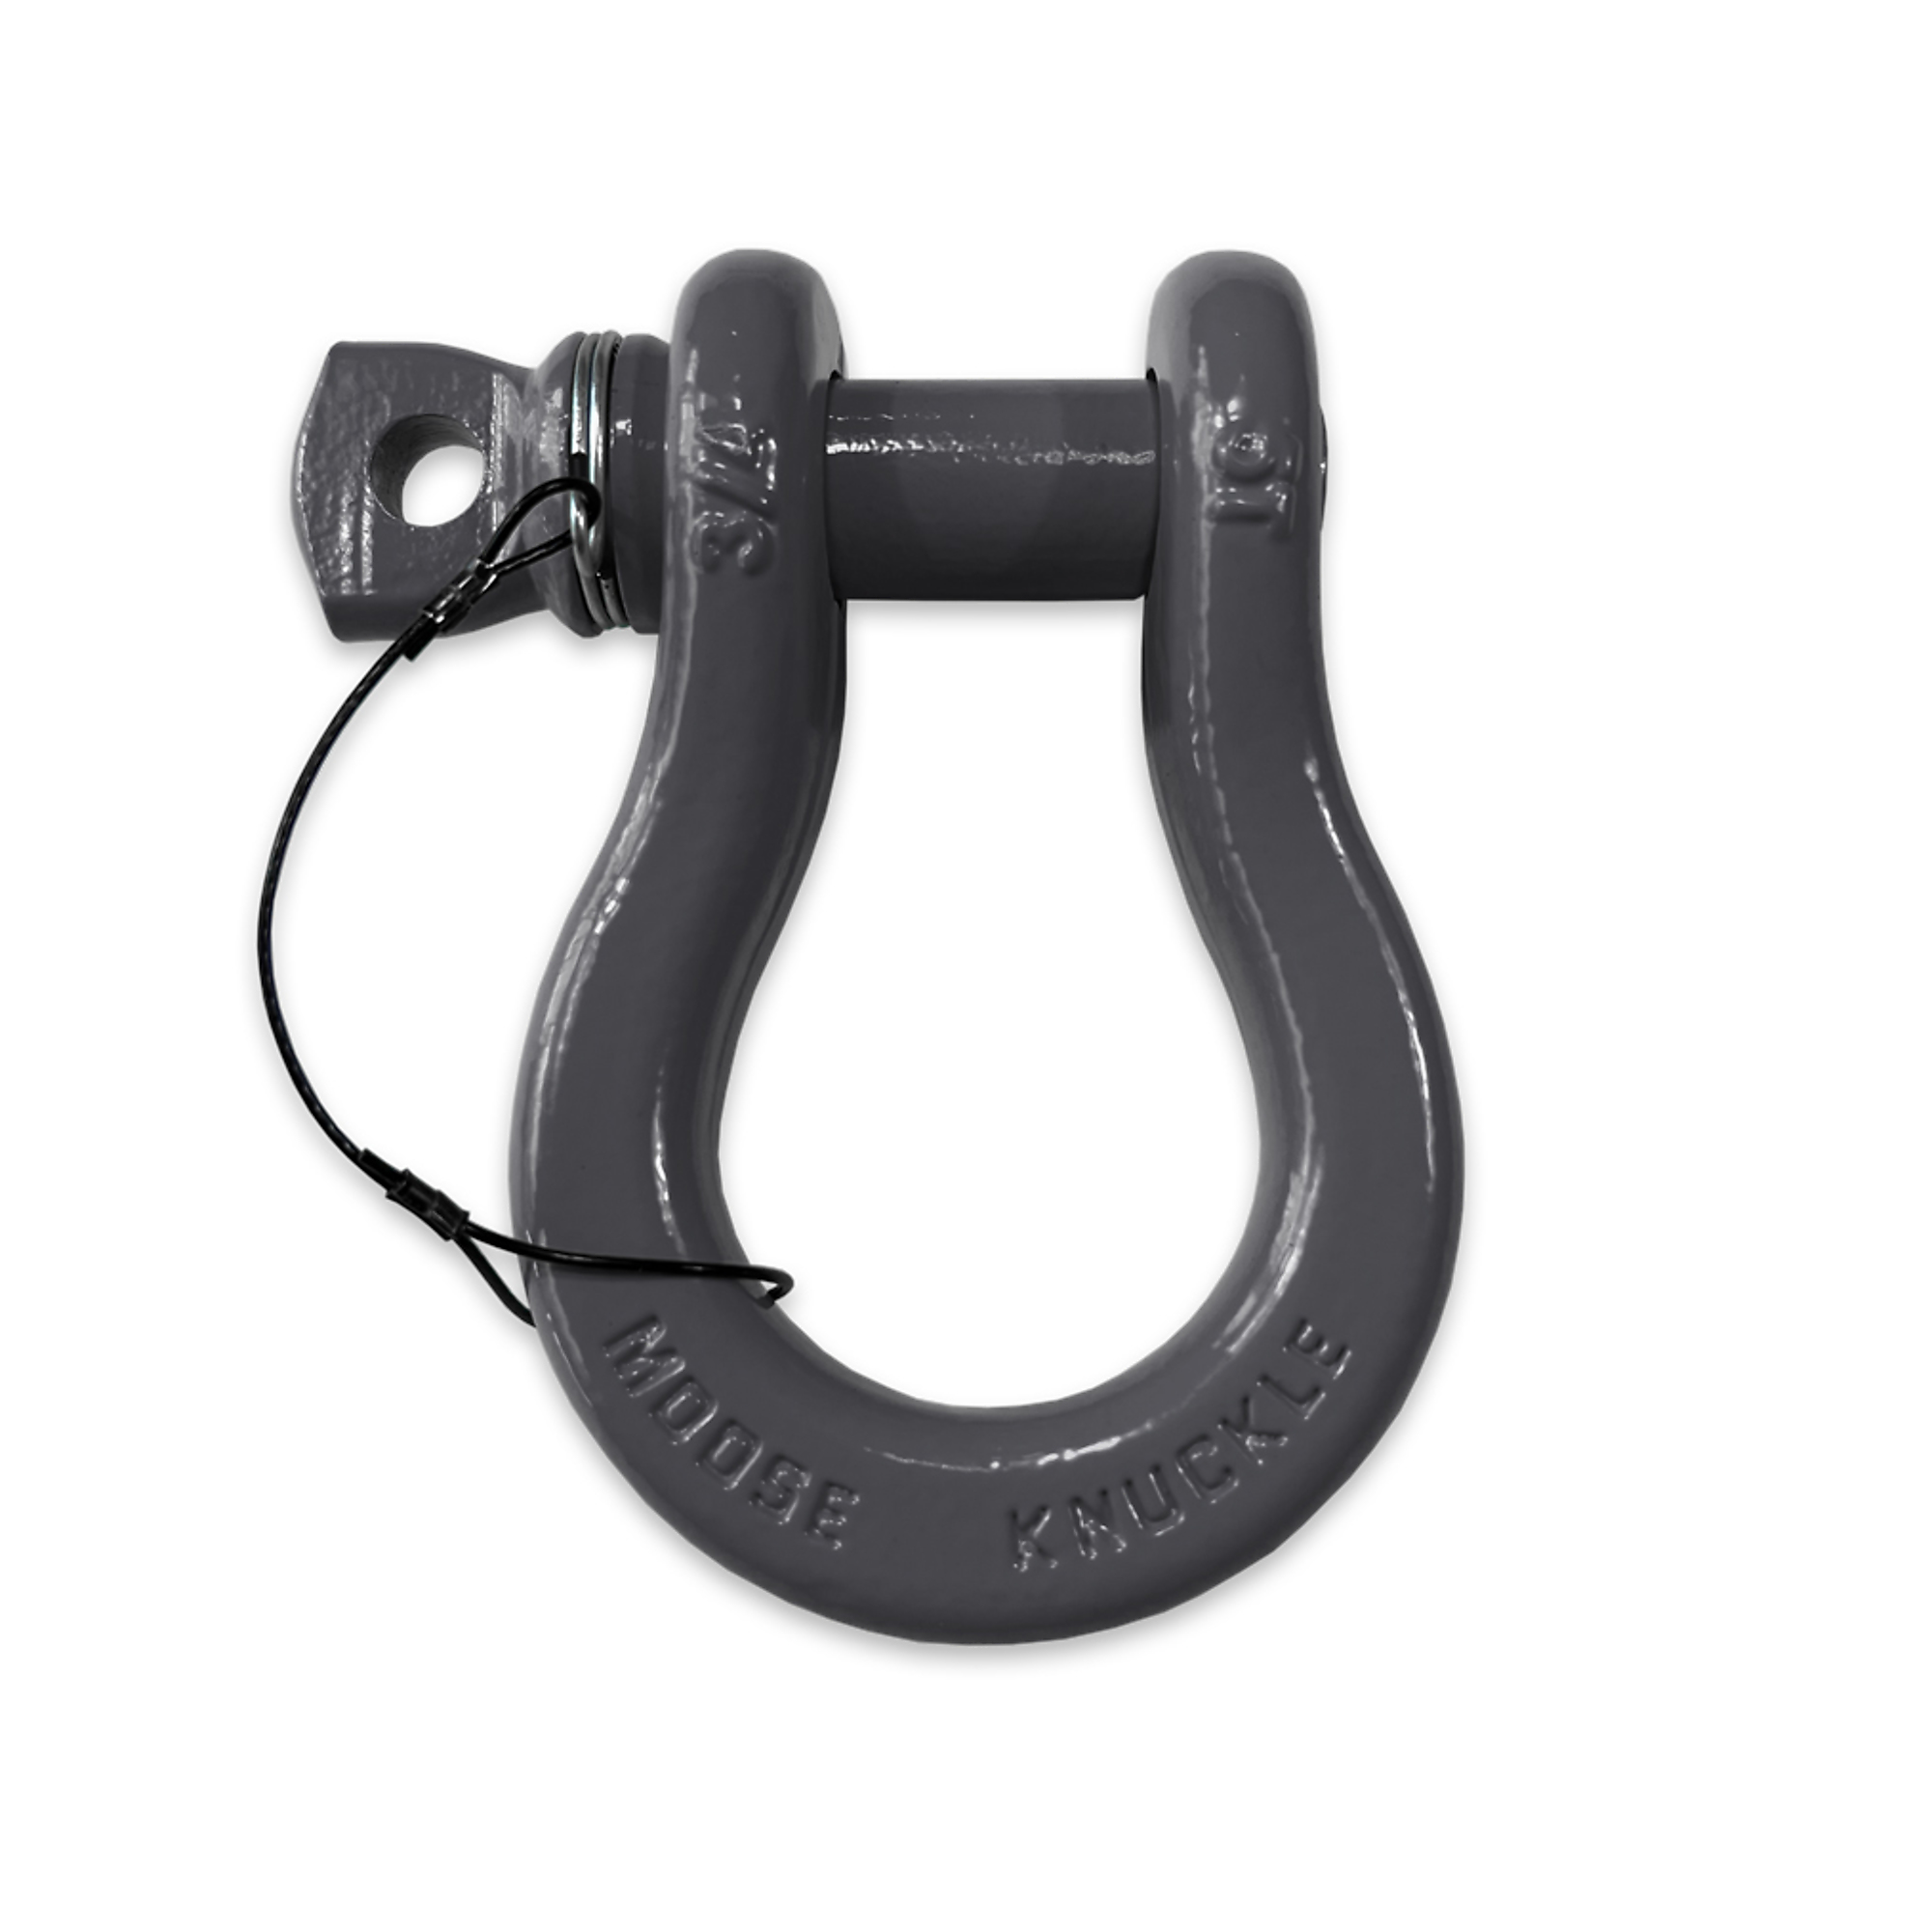 Moose Knuckle Offroad, Gun Gray Recovery Towing Lanyard Spin Pin 3/4 Shackle, Working Load Limit 10000 lb, Model FN000023-002